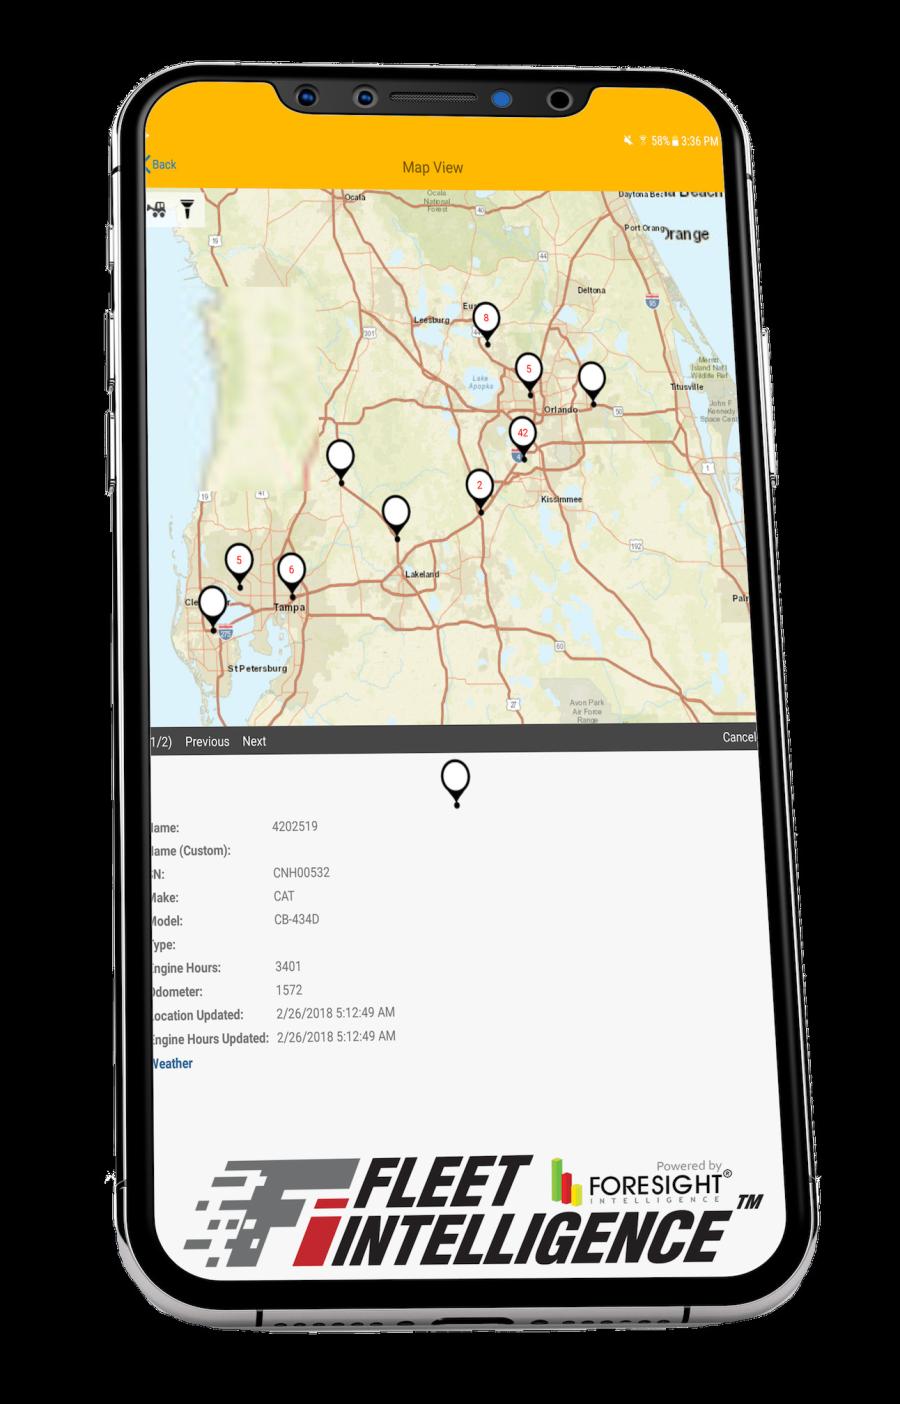 The map layers include the combined view, DTC (Diagnostic Trouble Code) Alert view, inspection view and more.